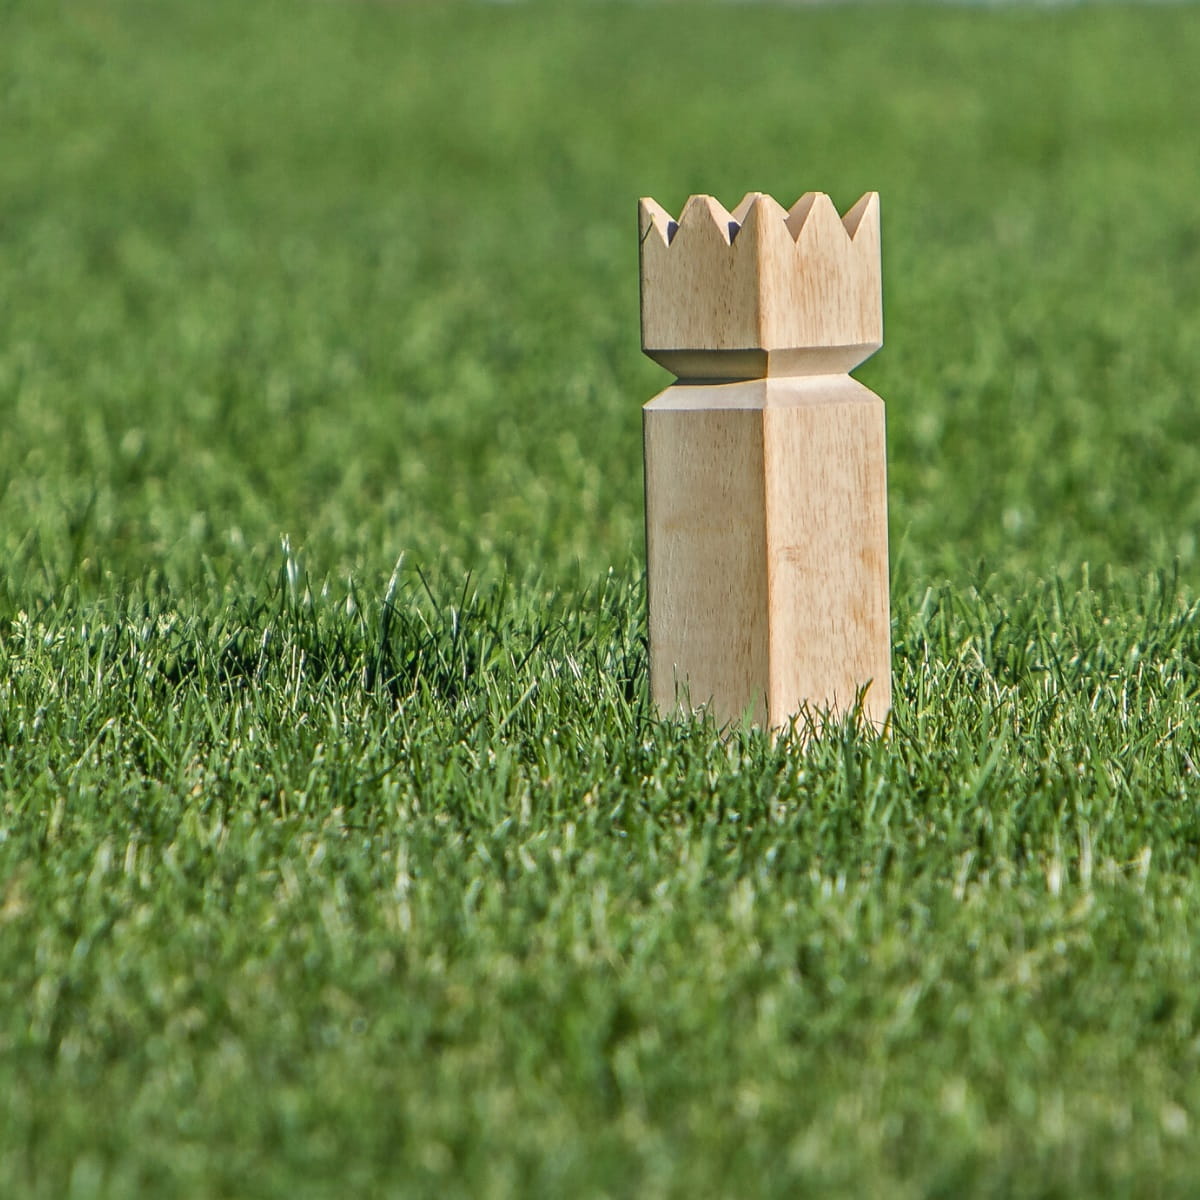 The king Kubb